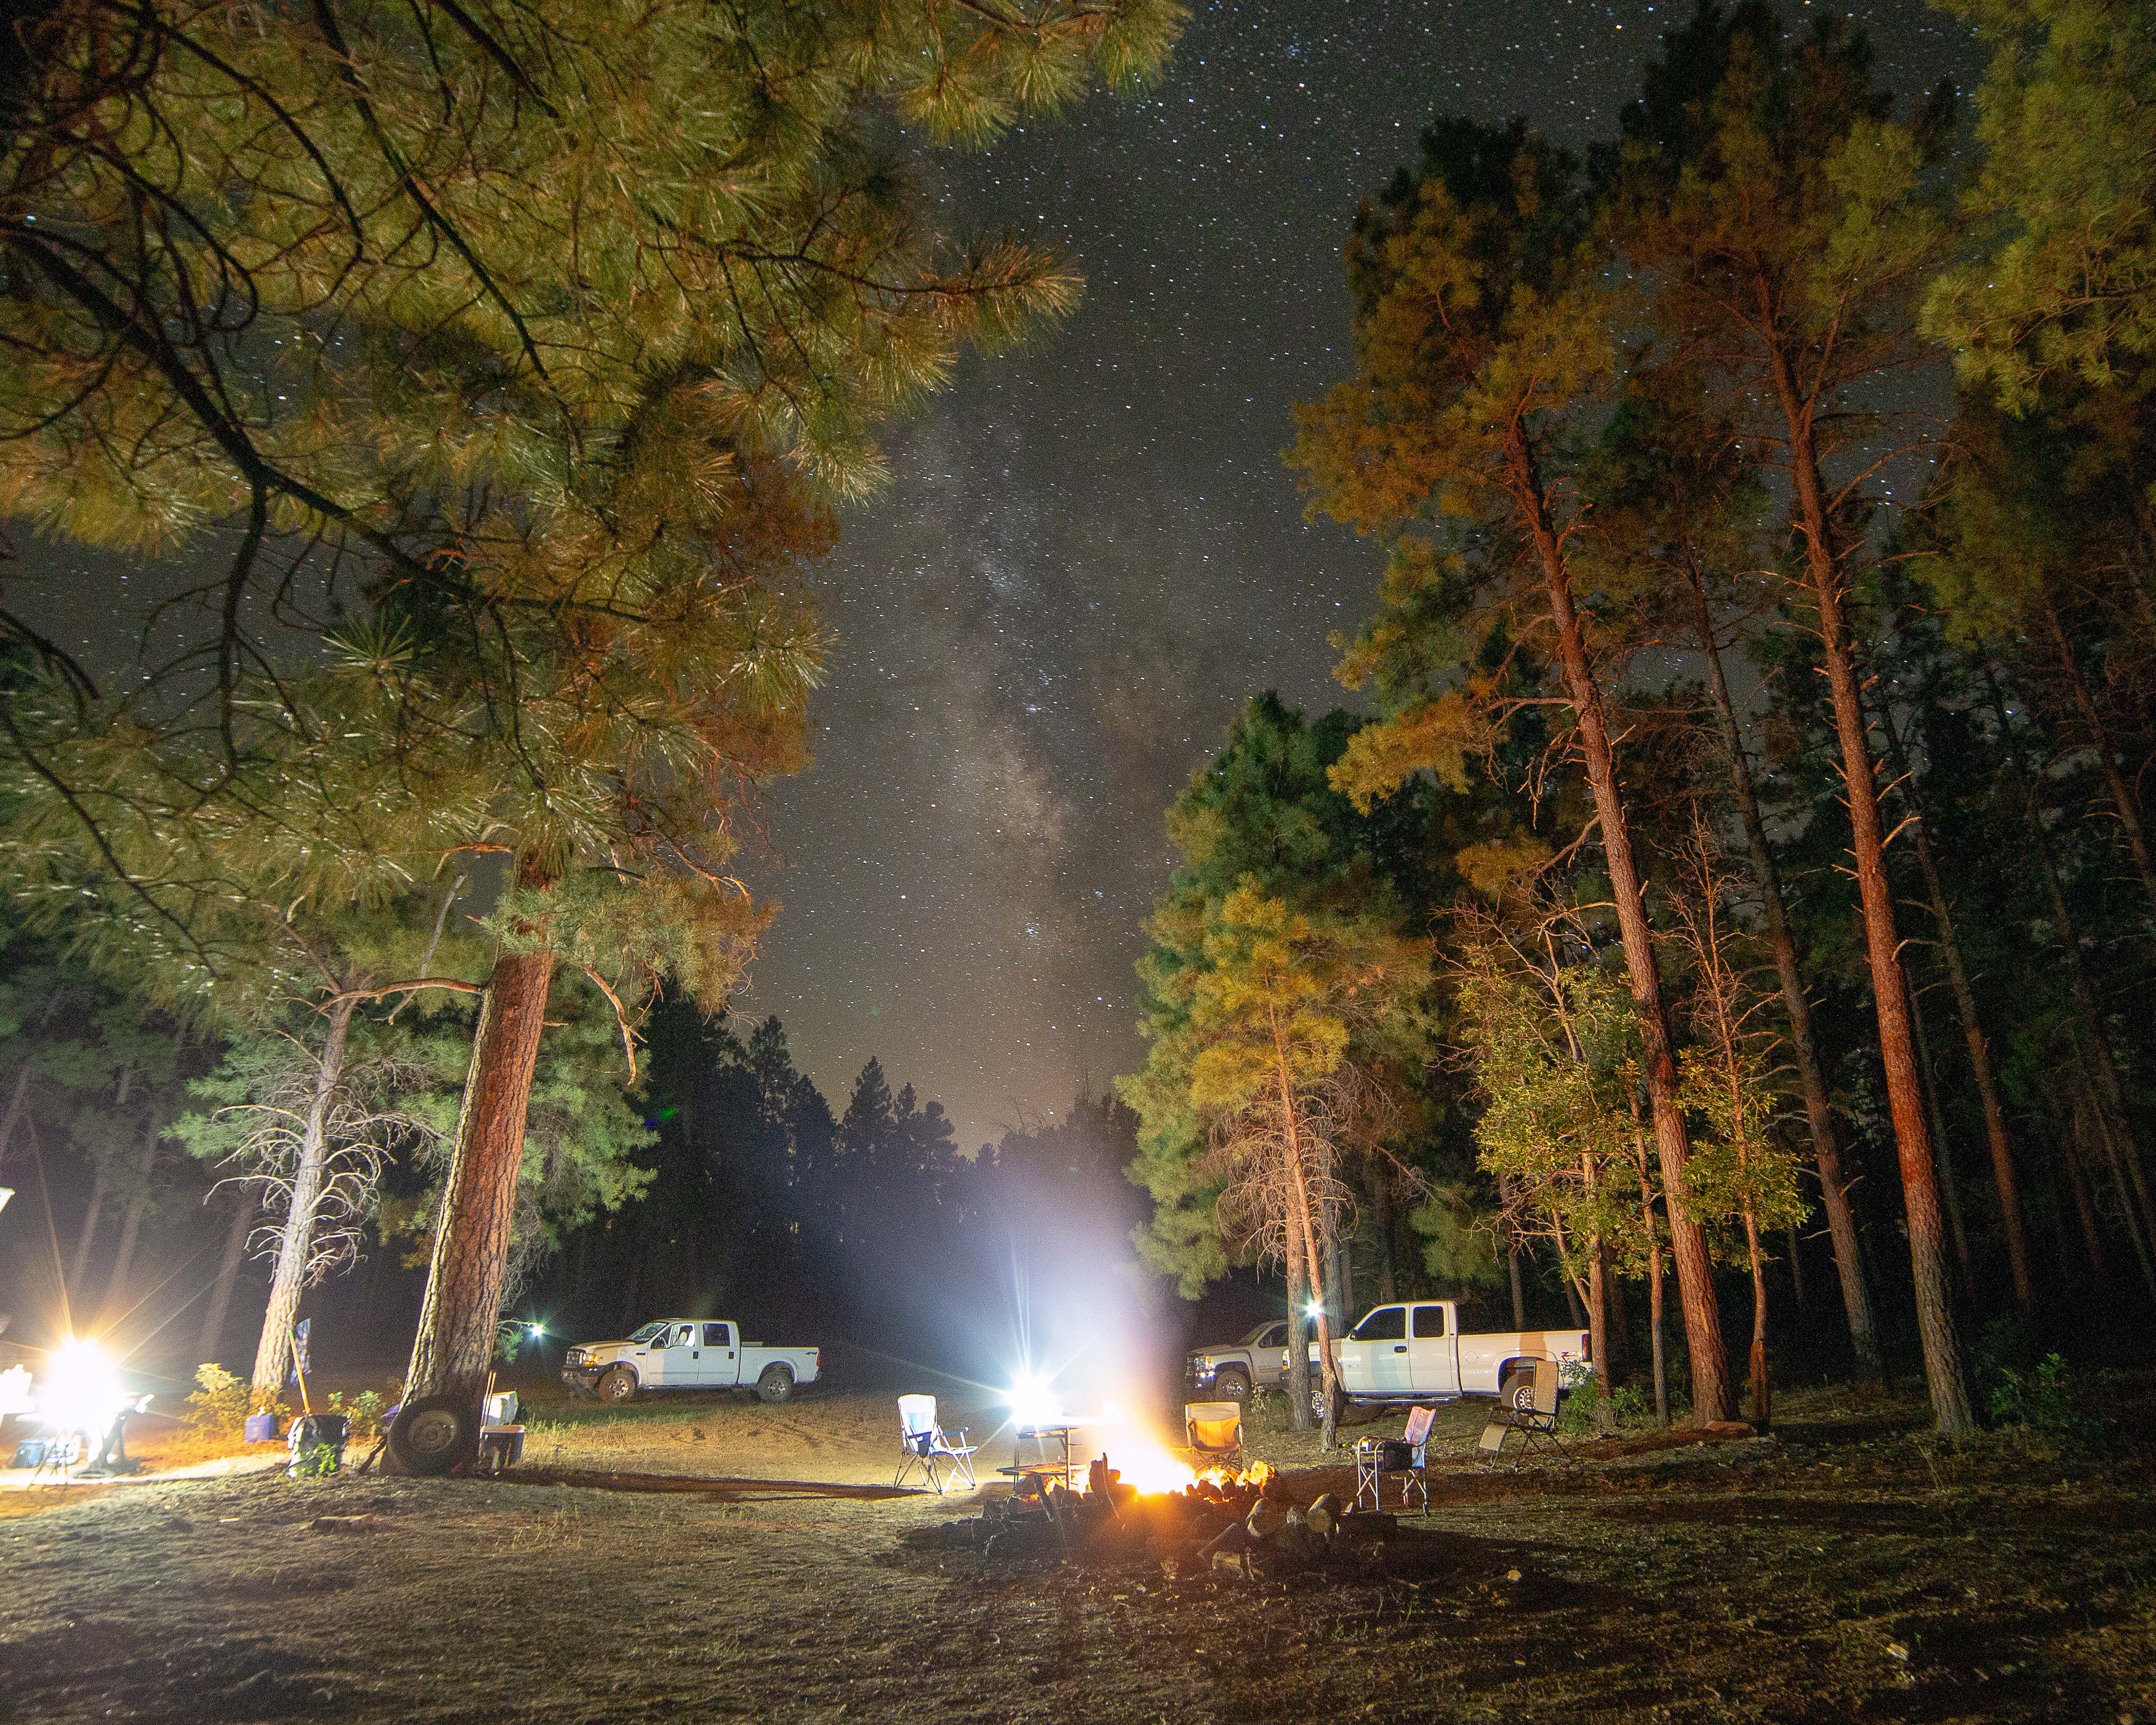 Photo by edward russell  |  Camping under the Milky Way in Williams, AZ